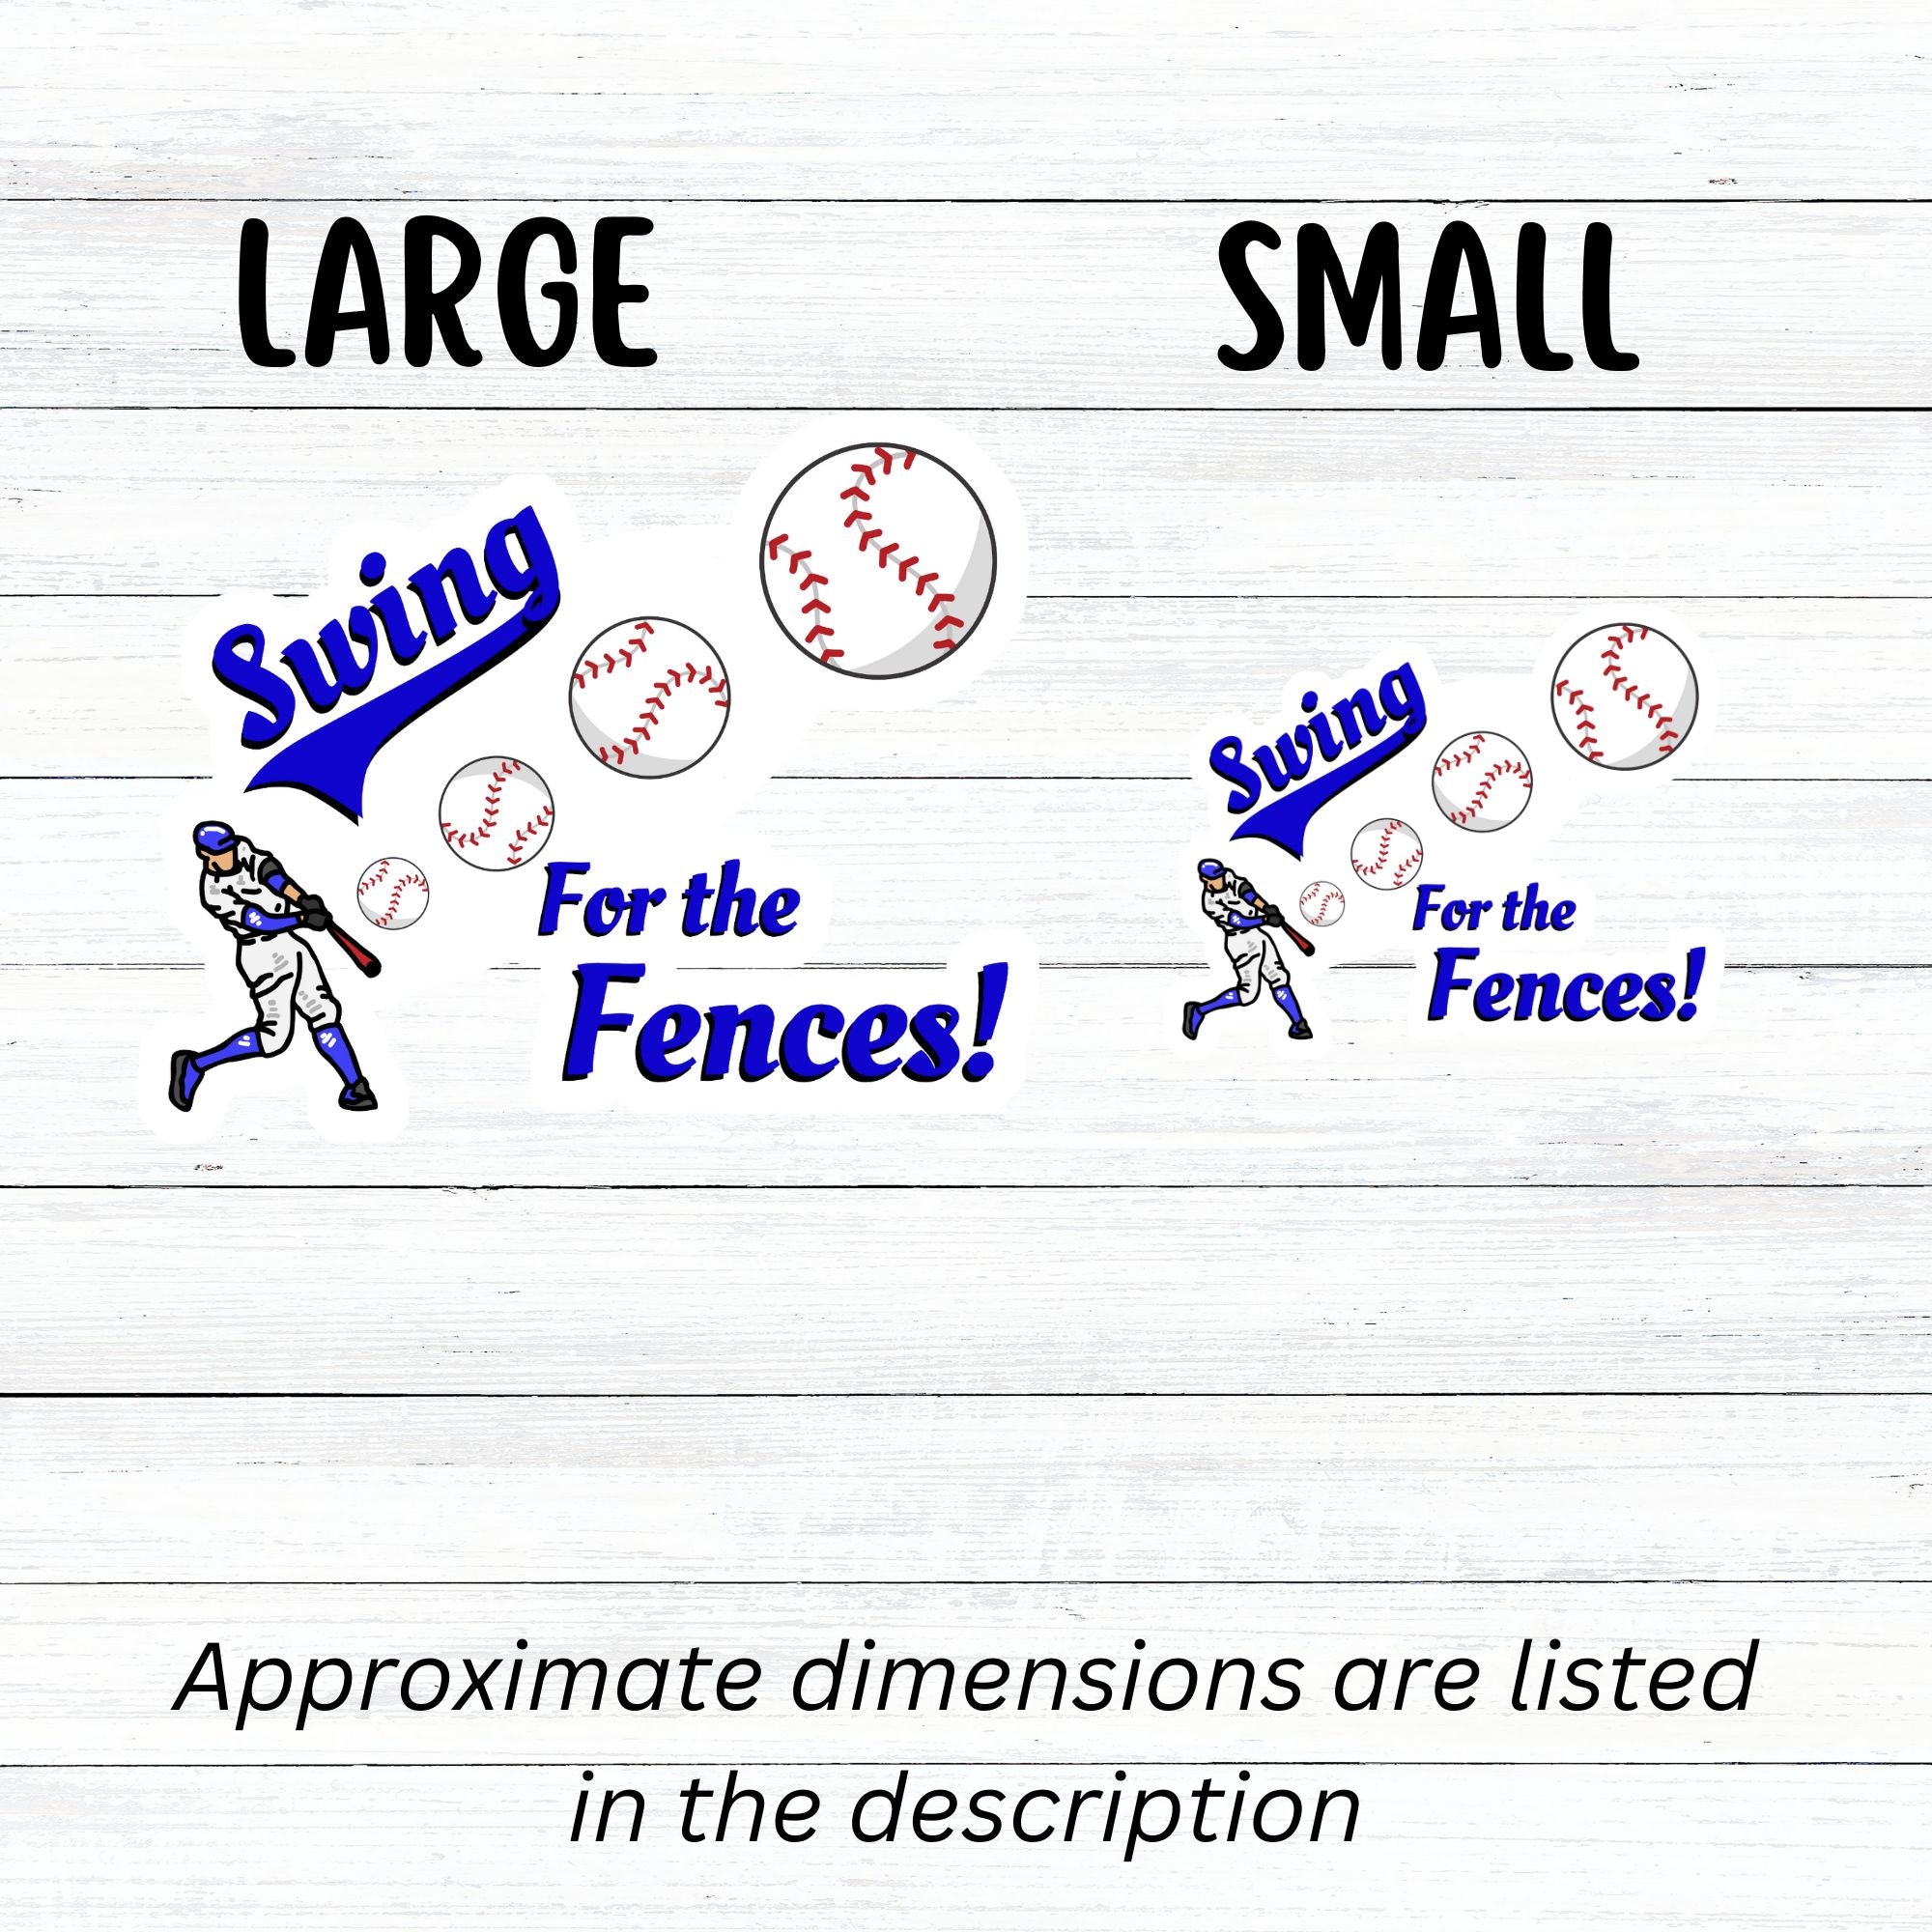 Swing for the Fences! - good for baseball and softball, but also as a metaphor for living our lives! This individual die-cut sticker features a ball player hitting a ball as it moves out towards us with the words Swing for the Fences. Check out our Inspirational collection for more inspiring stickers! This image shows large and small Swing for the Fences! stickers next to each other.